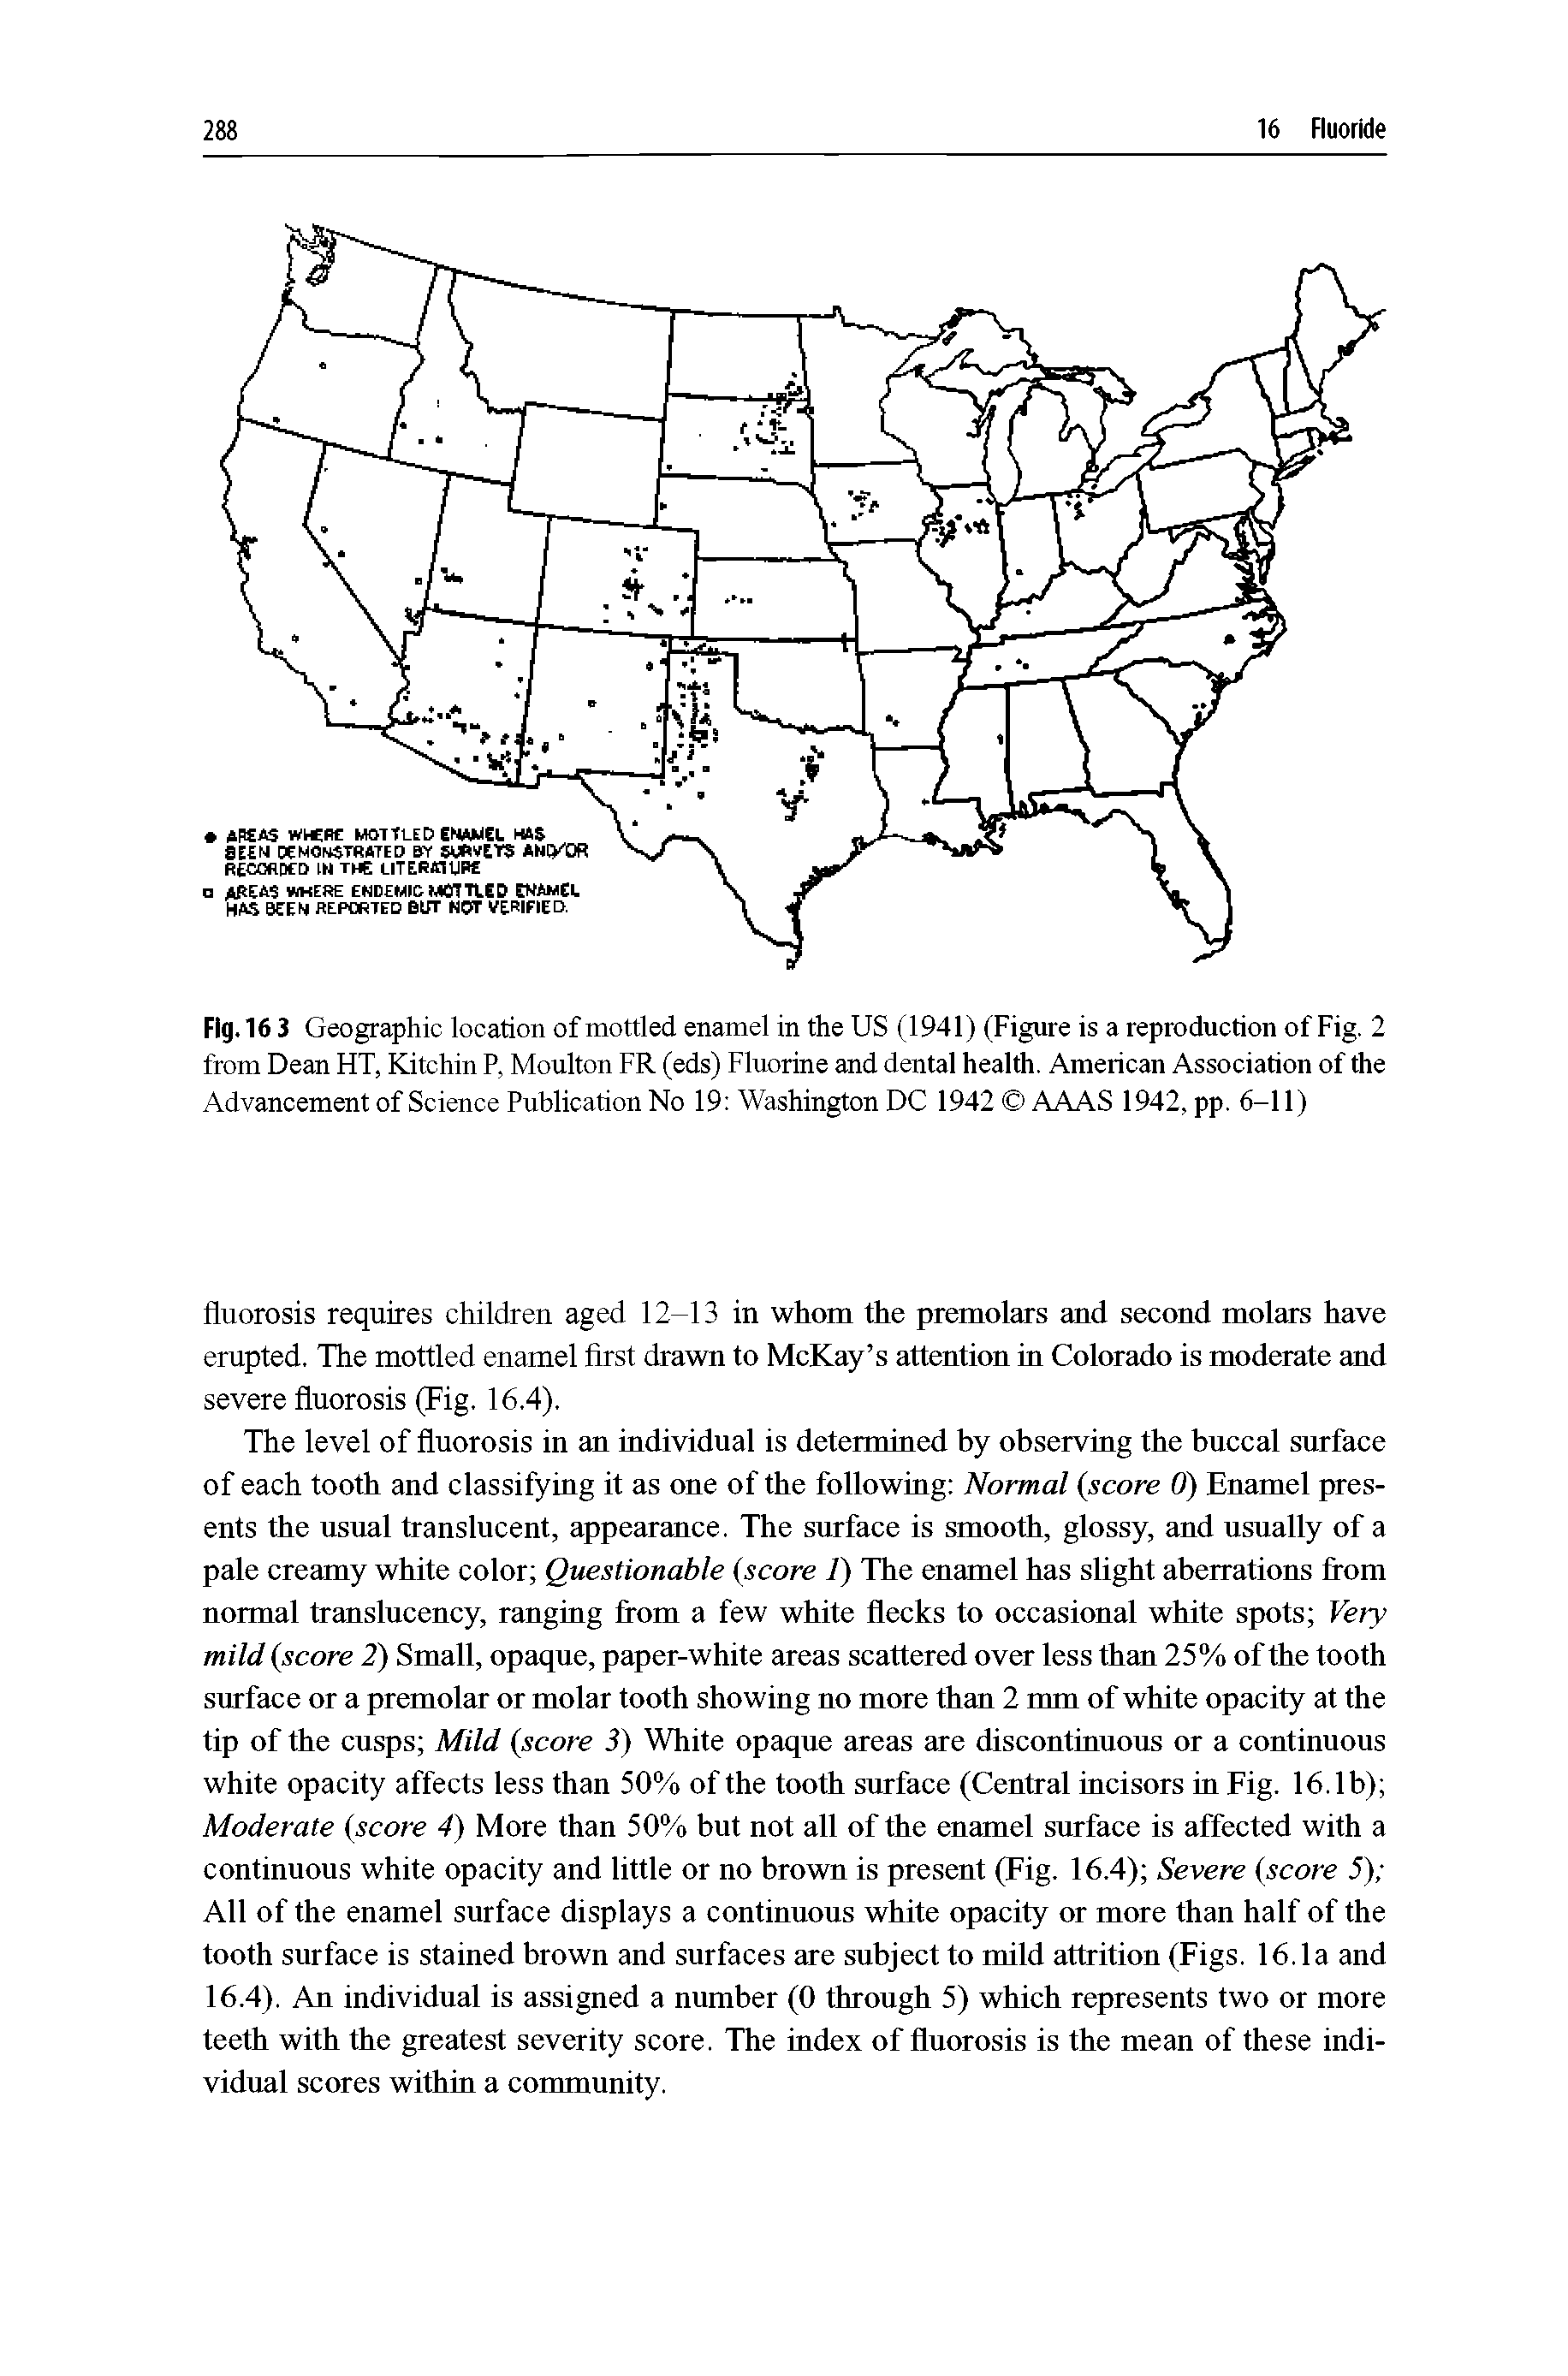 Fig. 16 3 Geographic location of mottled enamel in the US (1941) (Figure is a reproduction of Fig. 2 from Dean HT, Kitchin P, Moulton FR (eds) Fluorine and dental health. American Association of the Advancement of Science Publication No 19 Washington DC 1942 AAAS 1942, pp. 6-11)...